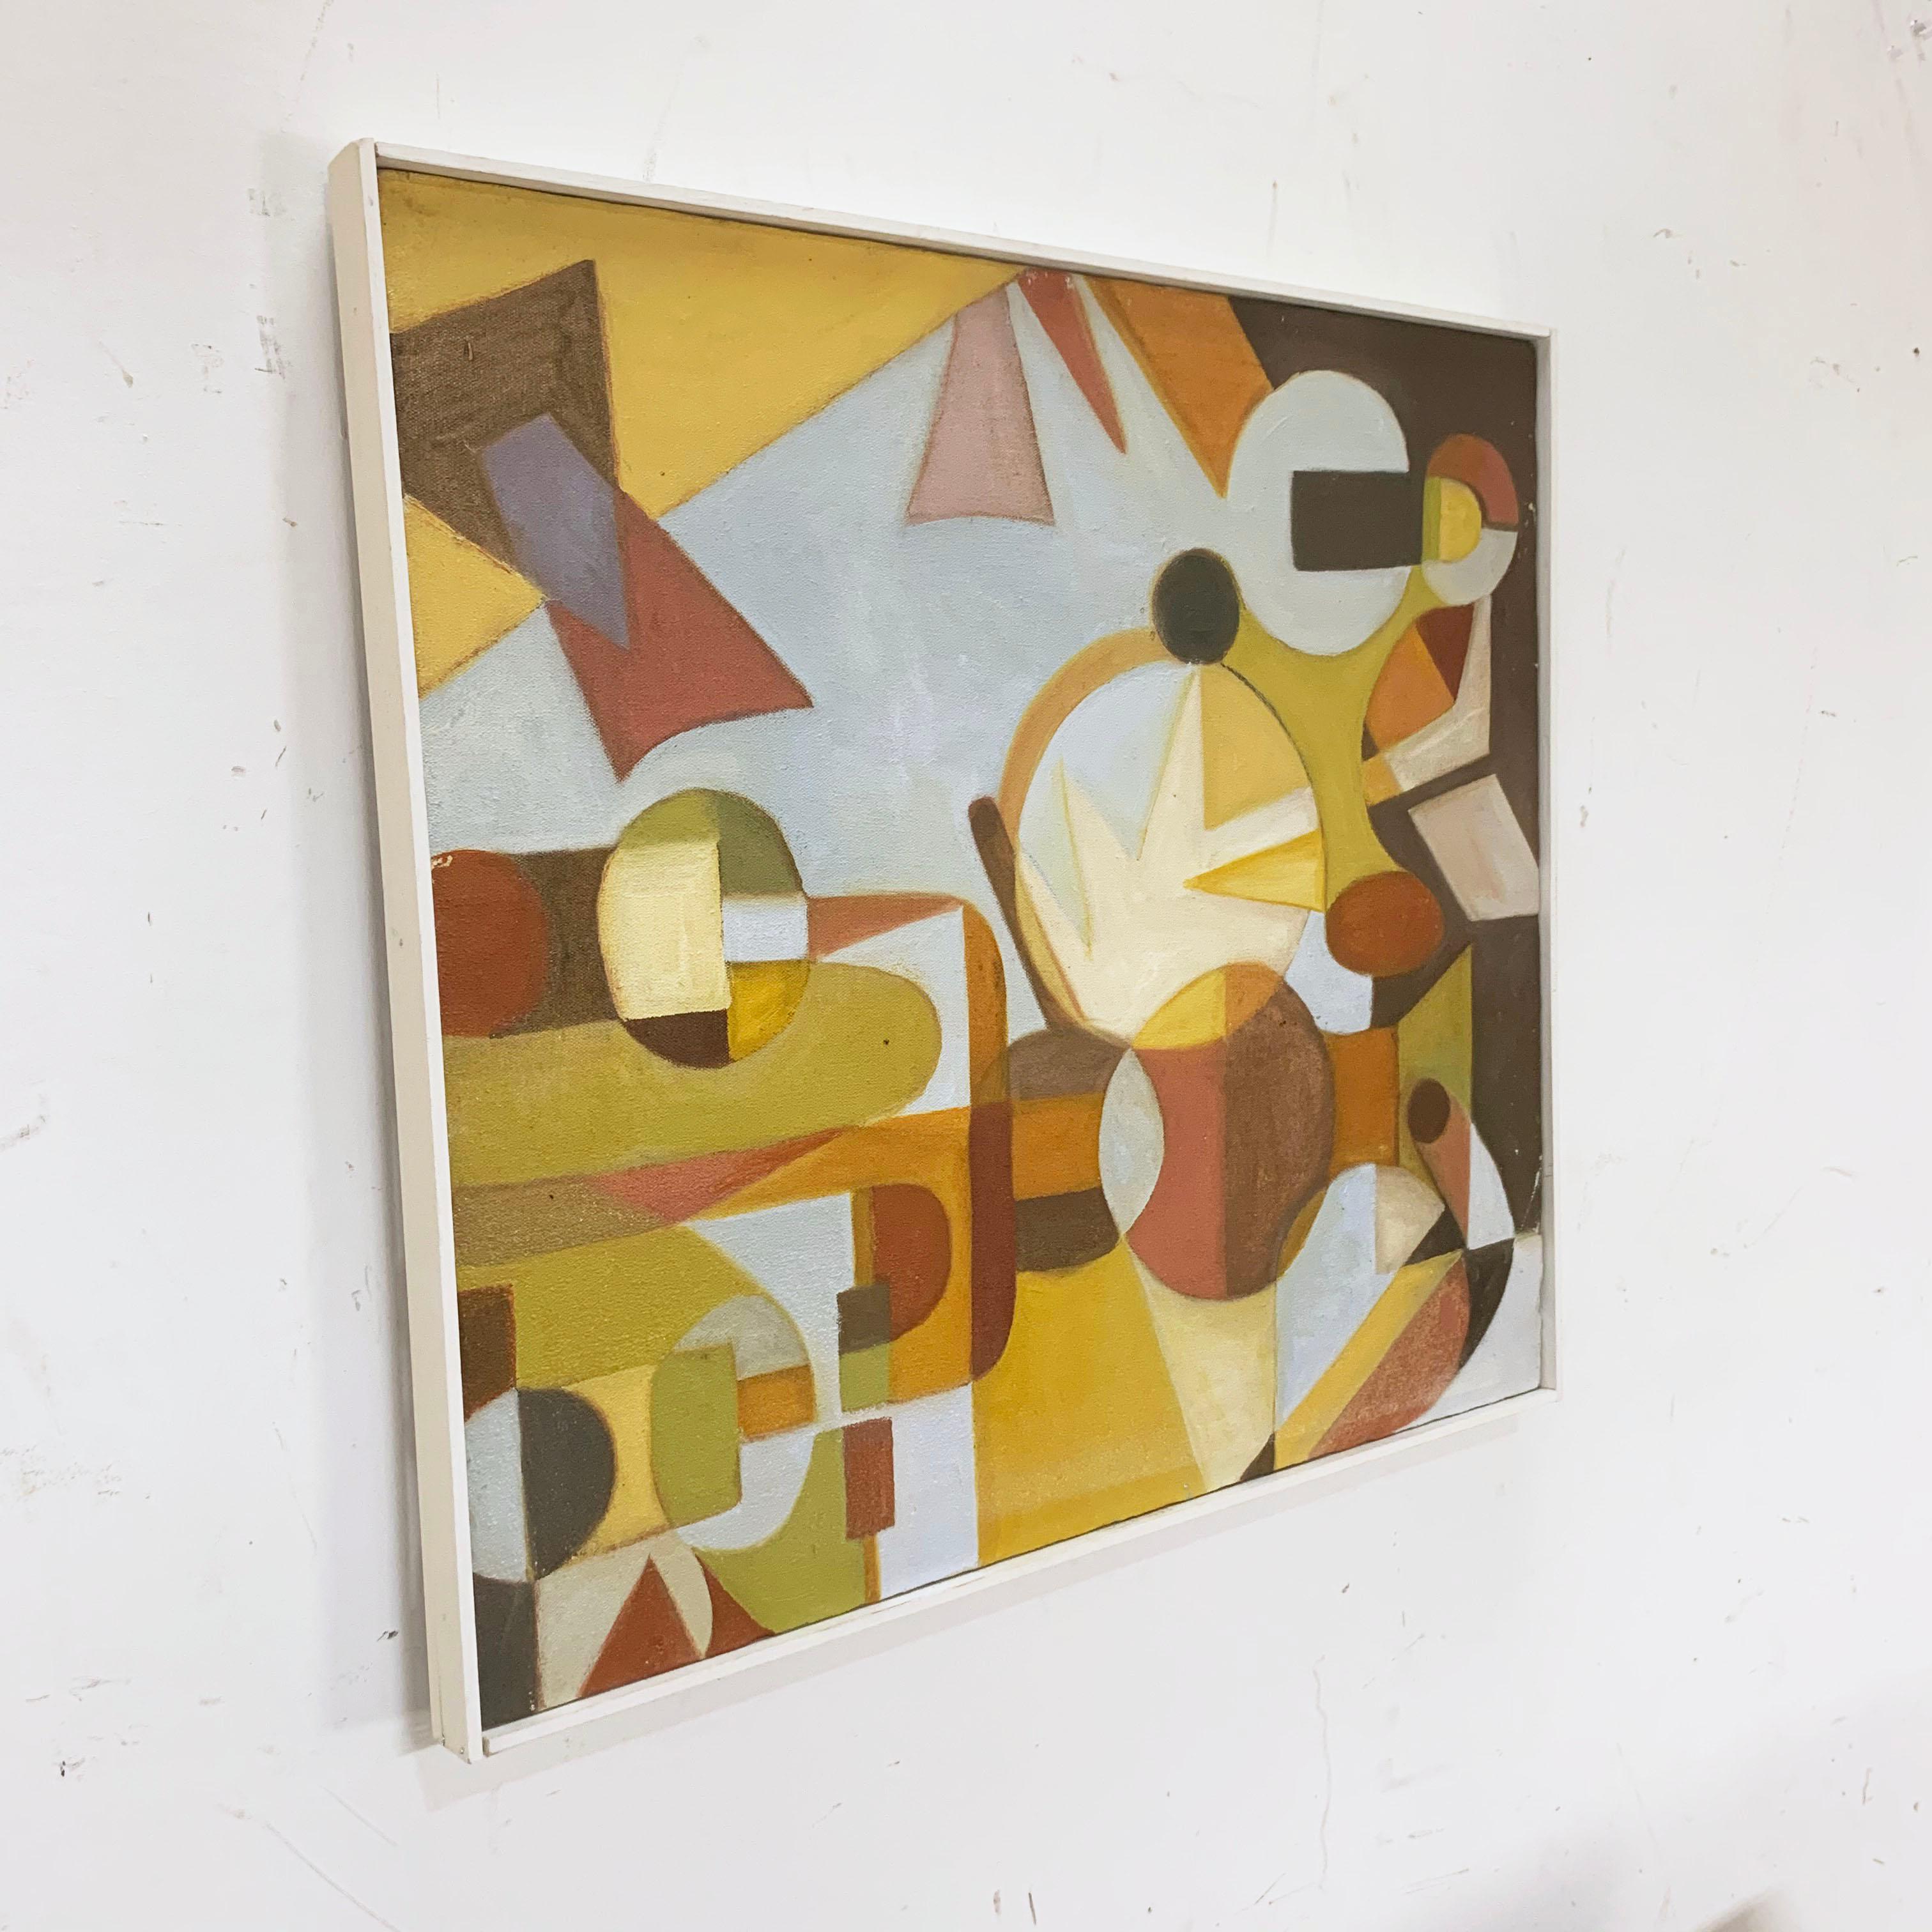 A vintage abstract geometric oil on canvas, dated 1978 by Boston area artist Denise Schwartz.